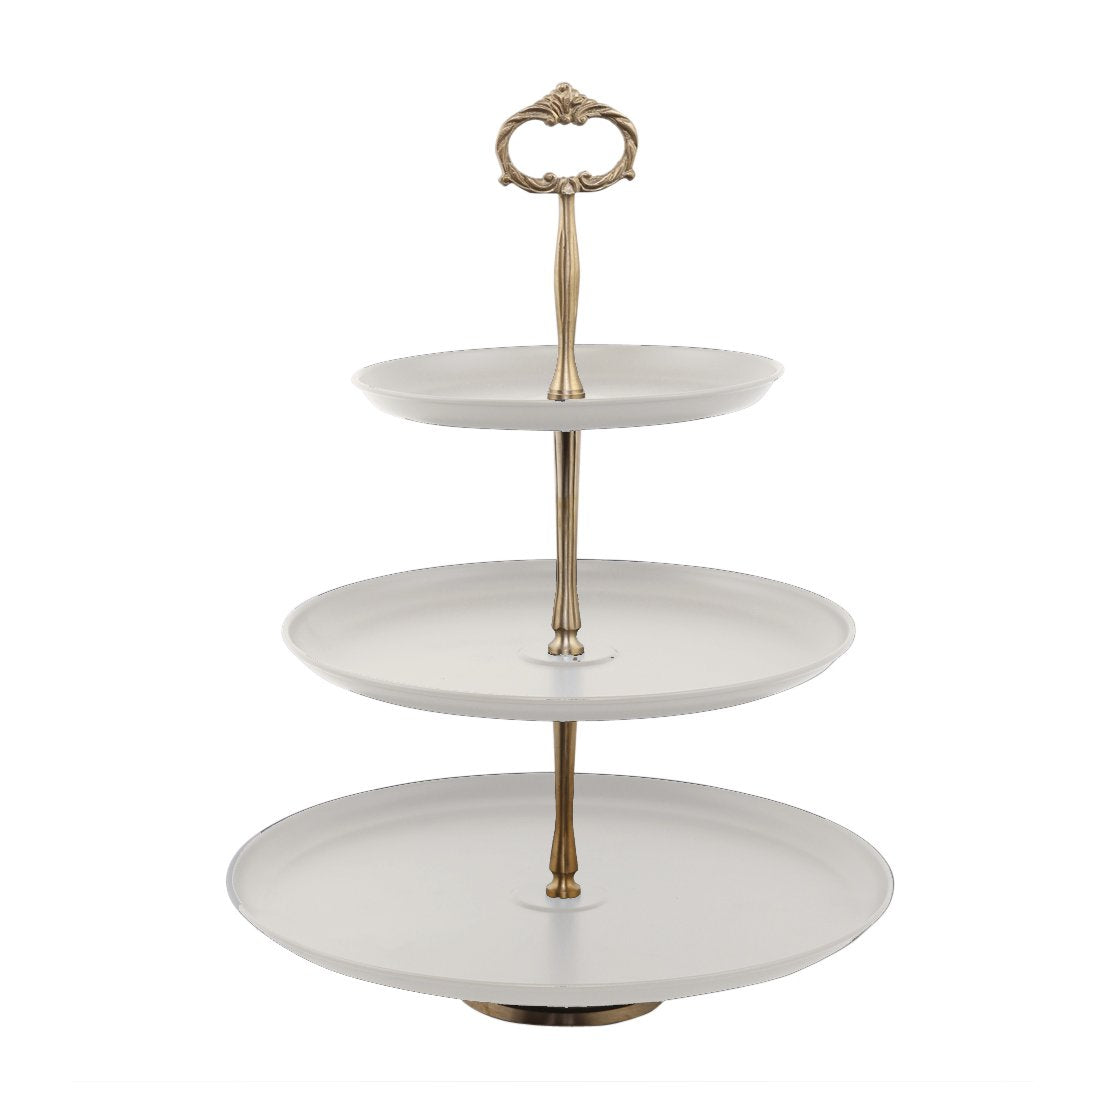 Buy SOPRETY Metal White Cake Stand 9.8in Round, Dessert Display Stand Cake  Holder, Decor for Wedding, Birthday, Party, Round, Stainless Steel Online  at Low Prices in India - Amazon.in